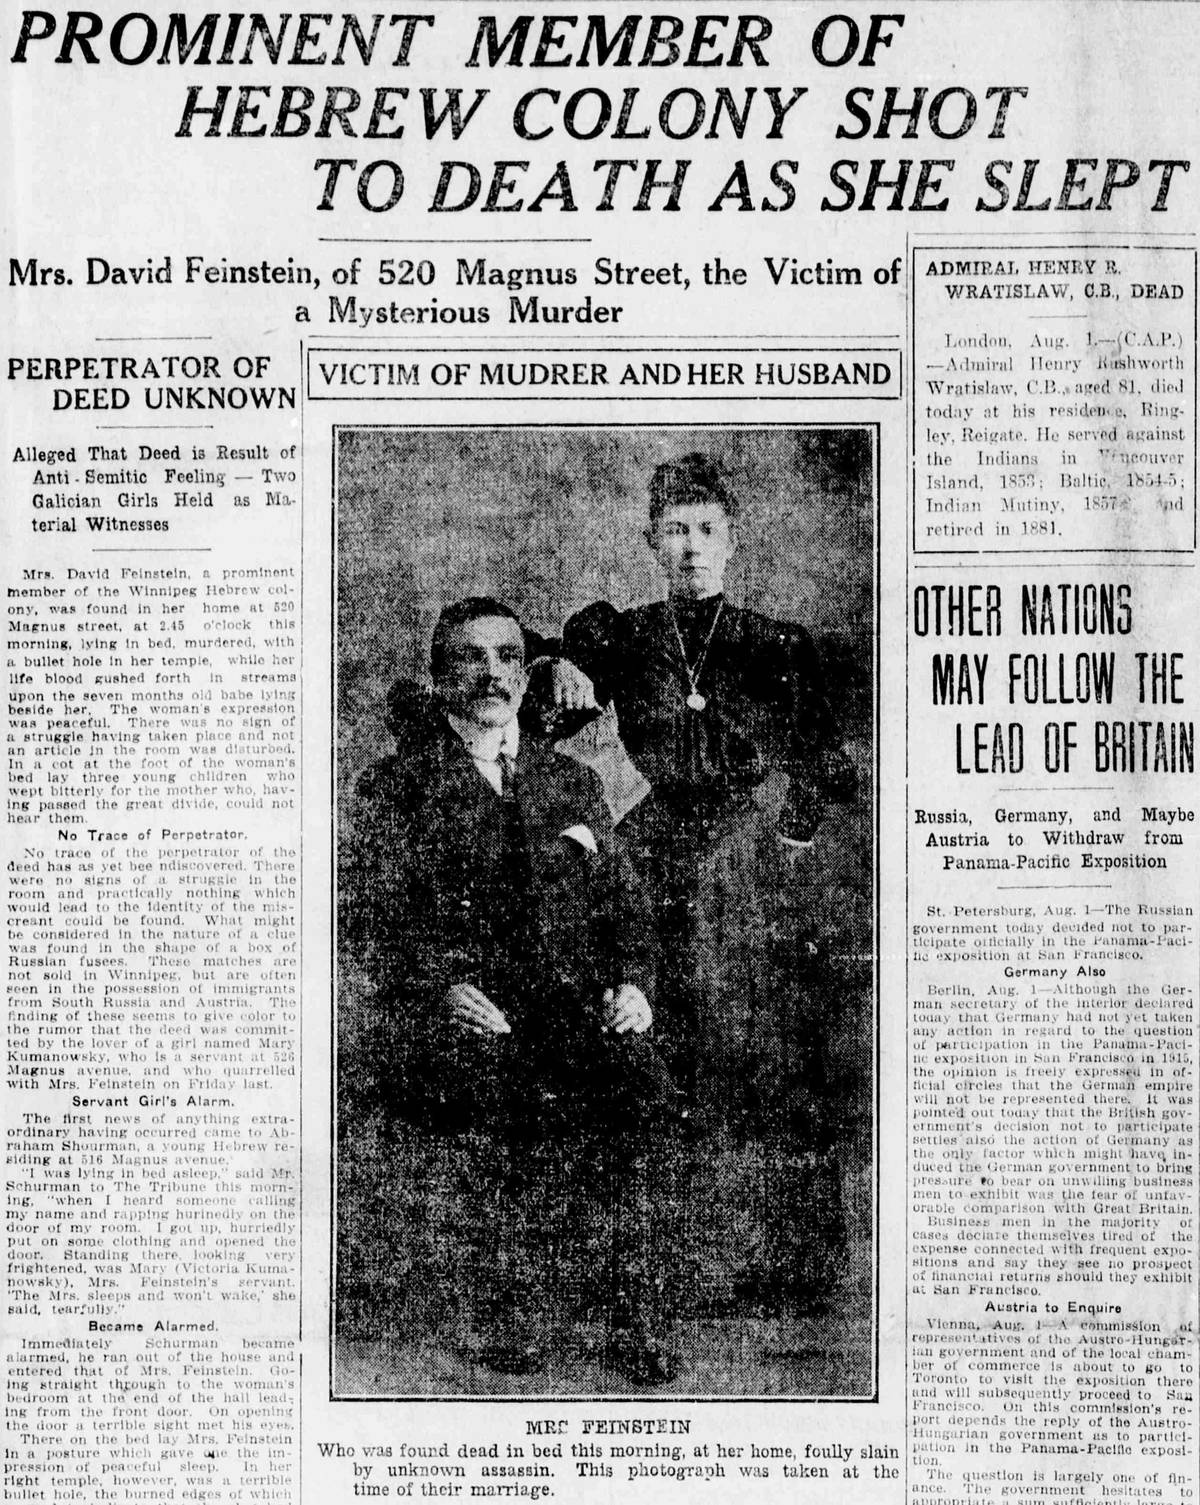 The front page of the 'Winnipeg Tribune' on the day of the murder, Aug. 1, 1913